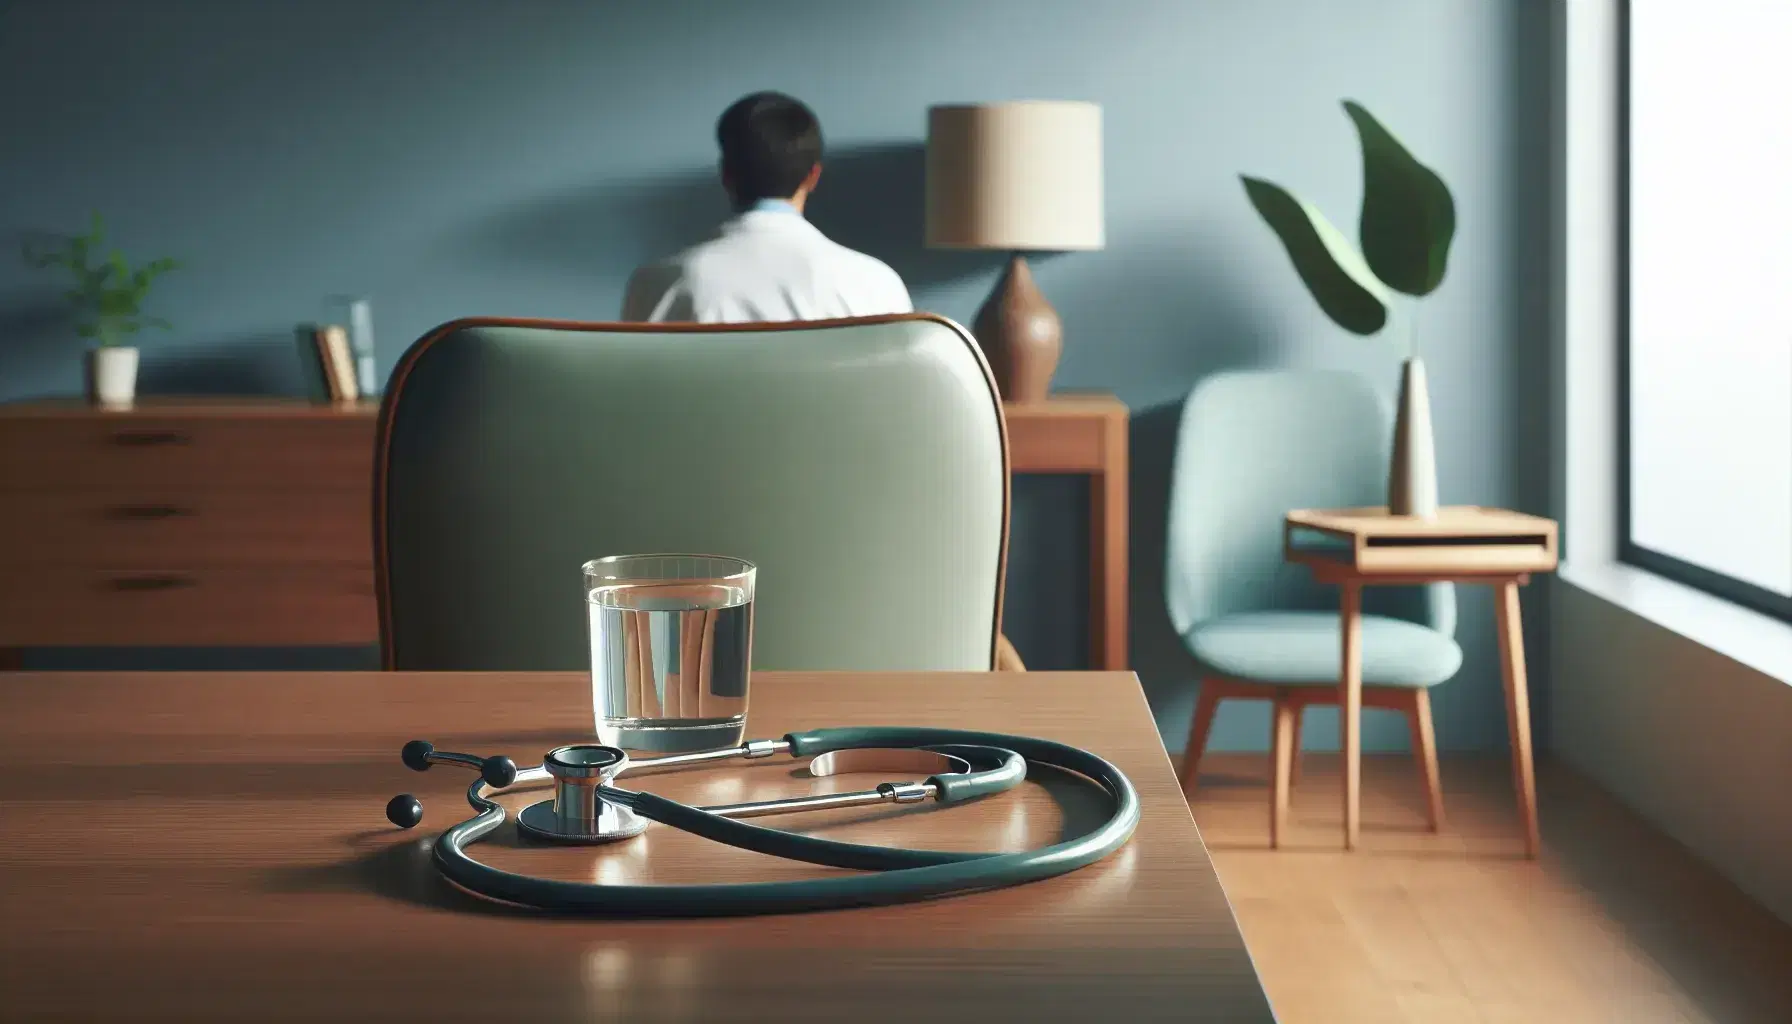 A psychiatrist's office with wooden desk, stethoscope, glass of water, doctor and patient with their backs in conversation, green plant, natural light.